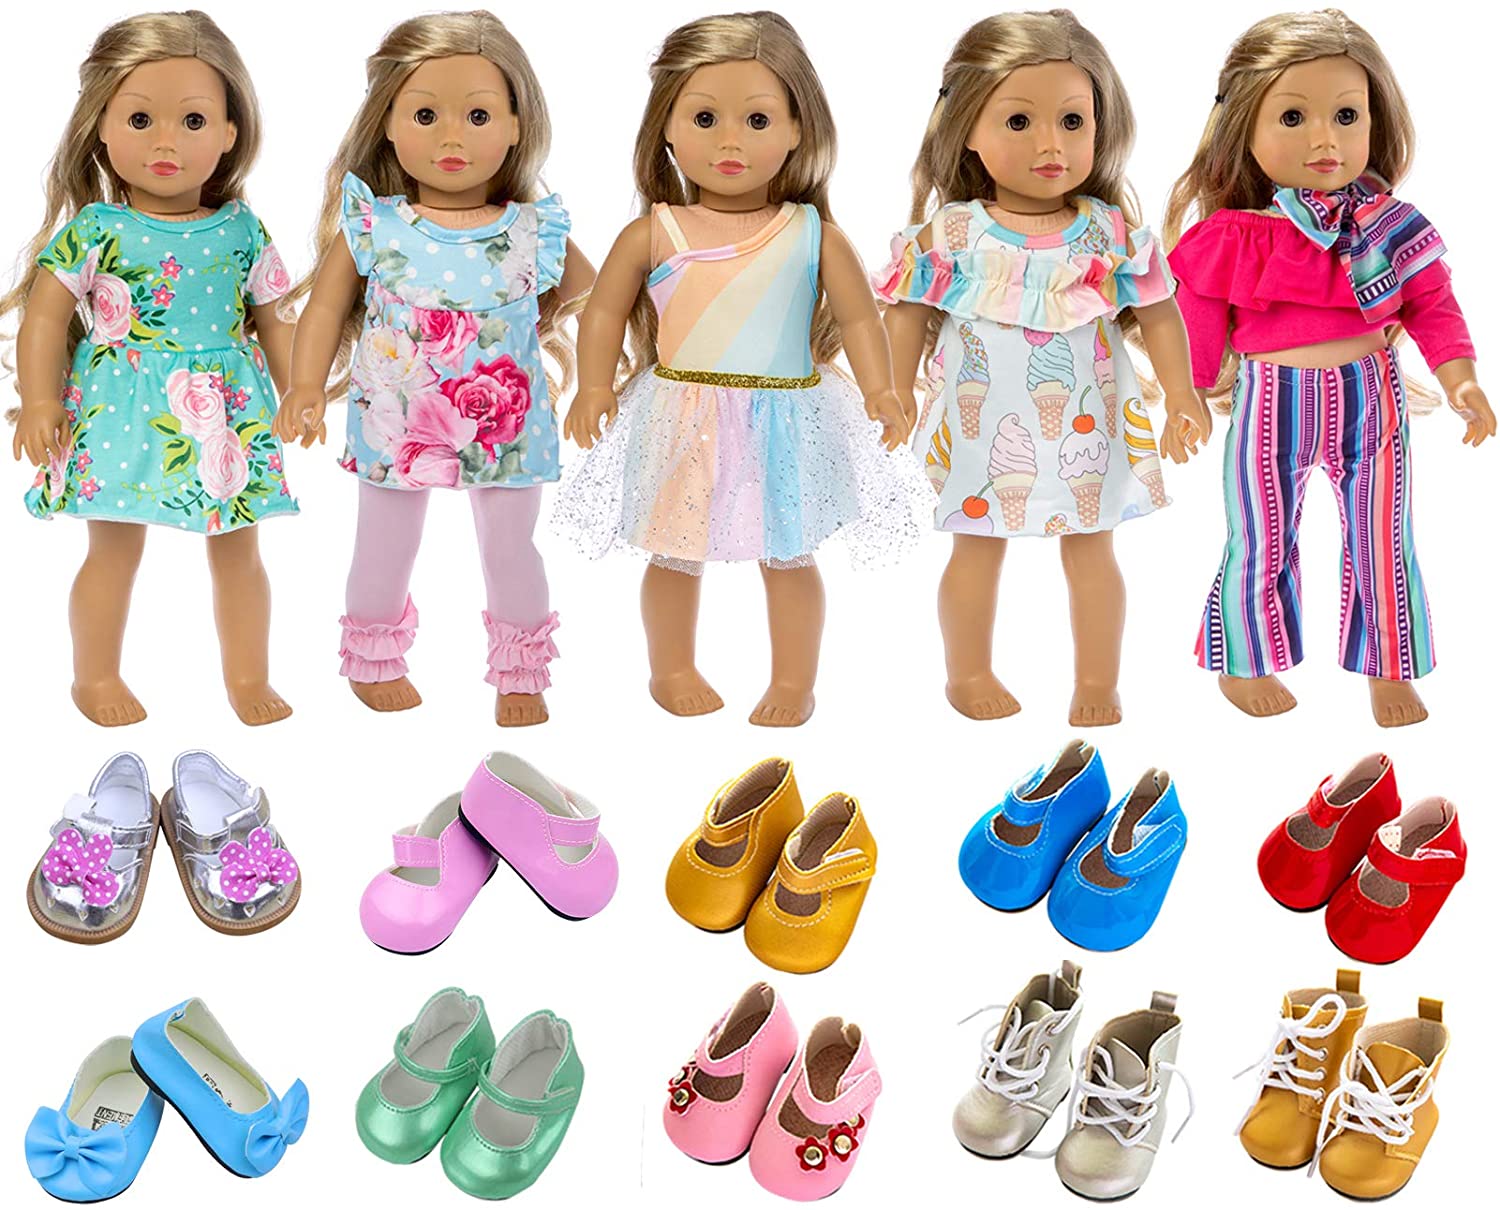 New 8 PCS Doll Clothes Lot Party Dress Outfit For 18" inch American Girl Doll 